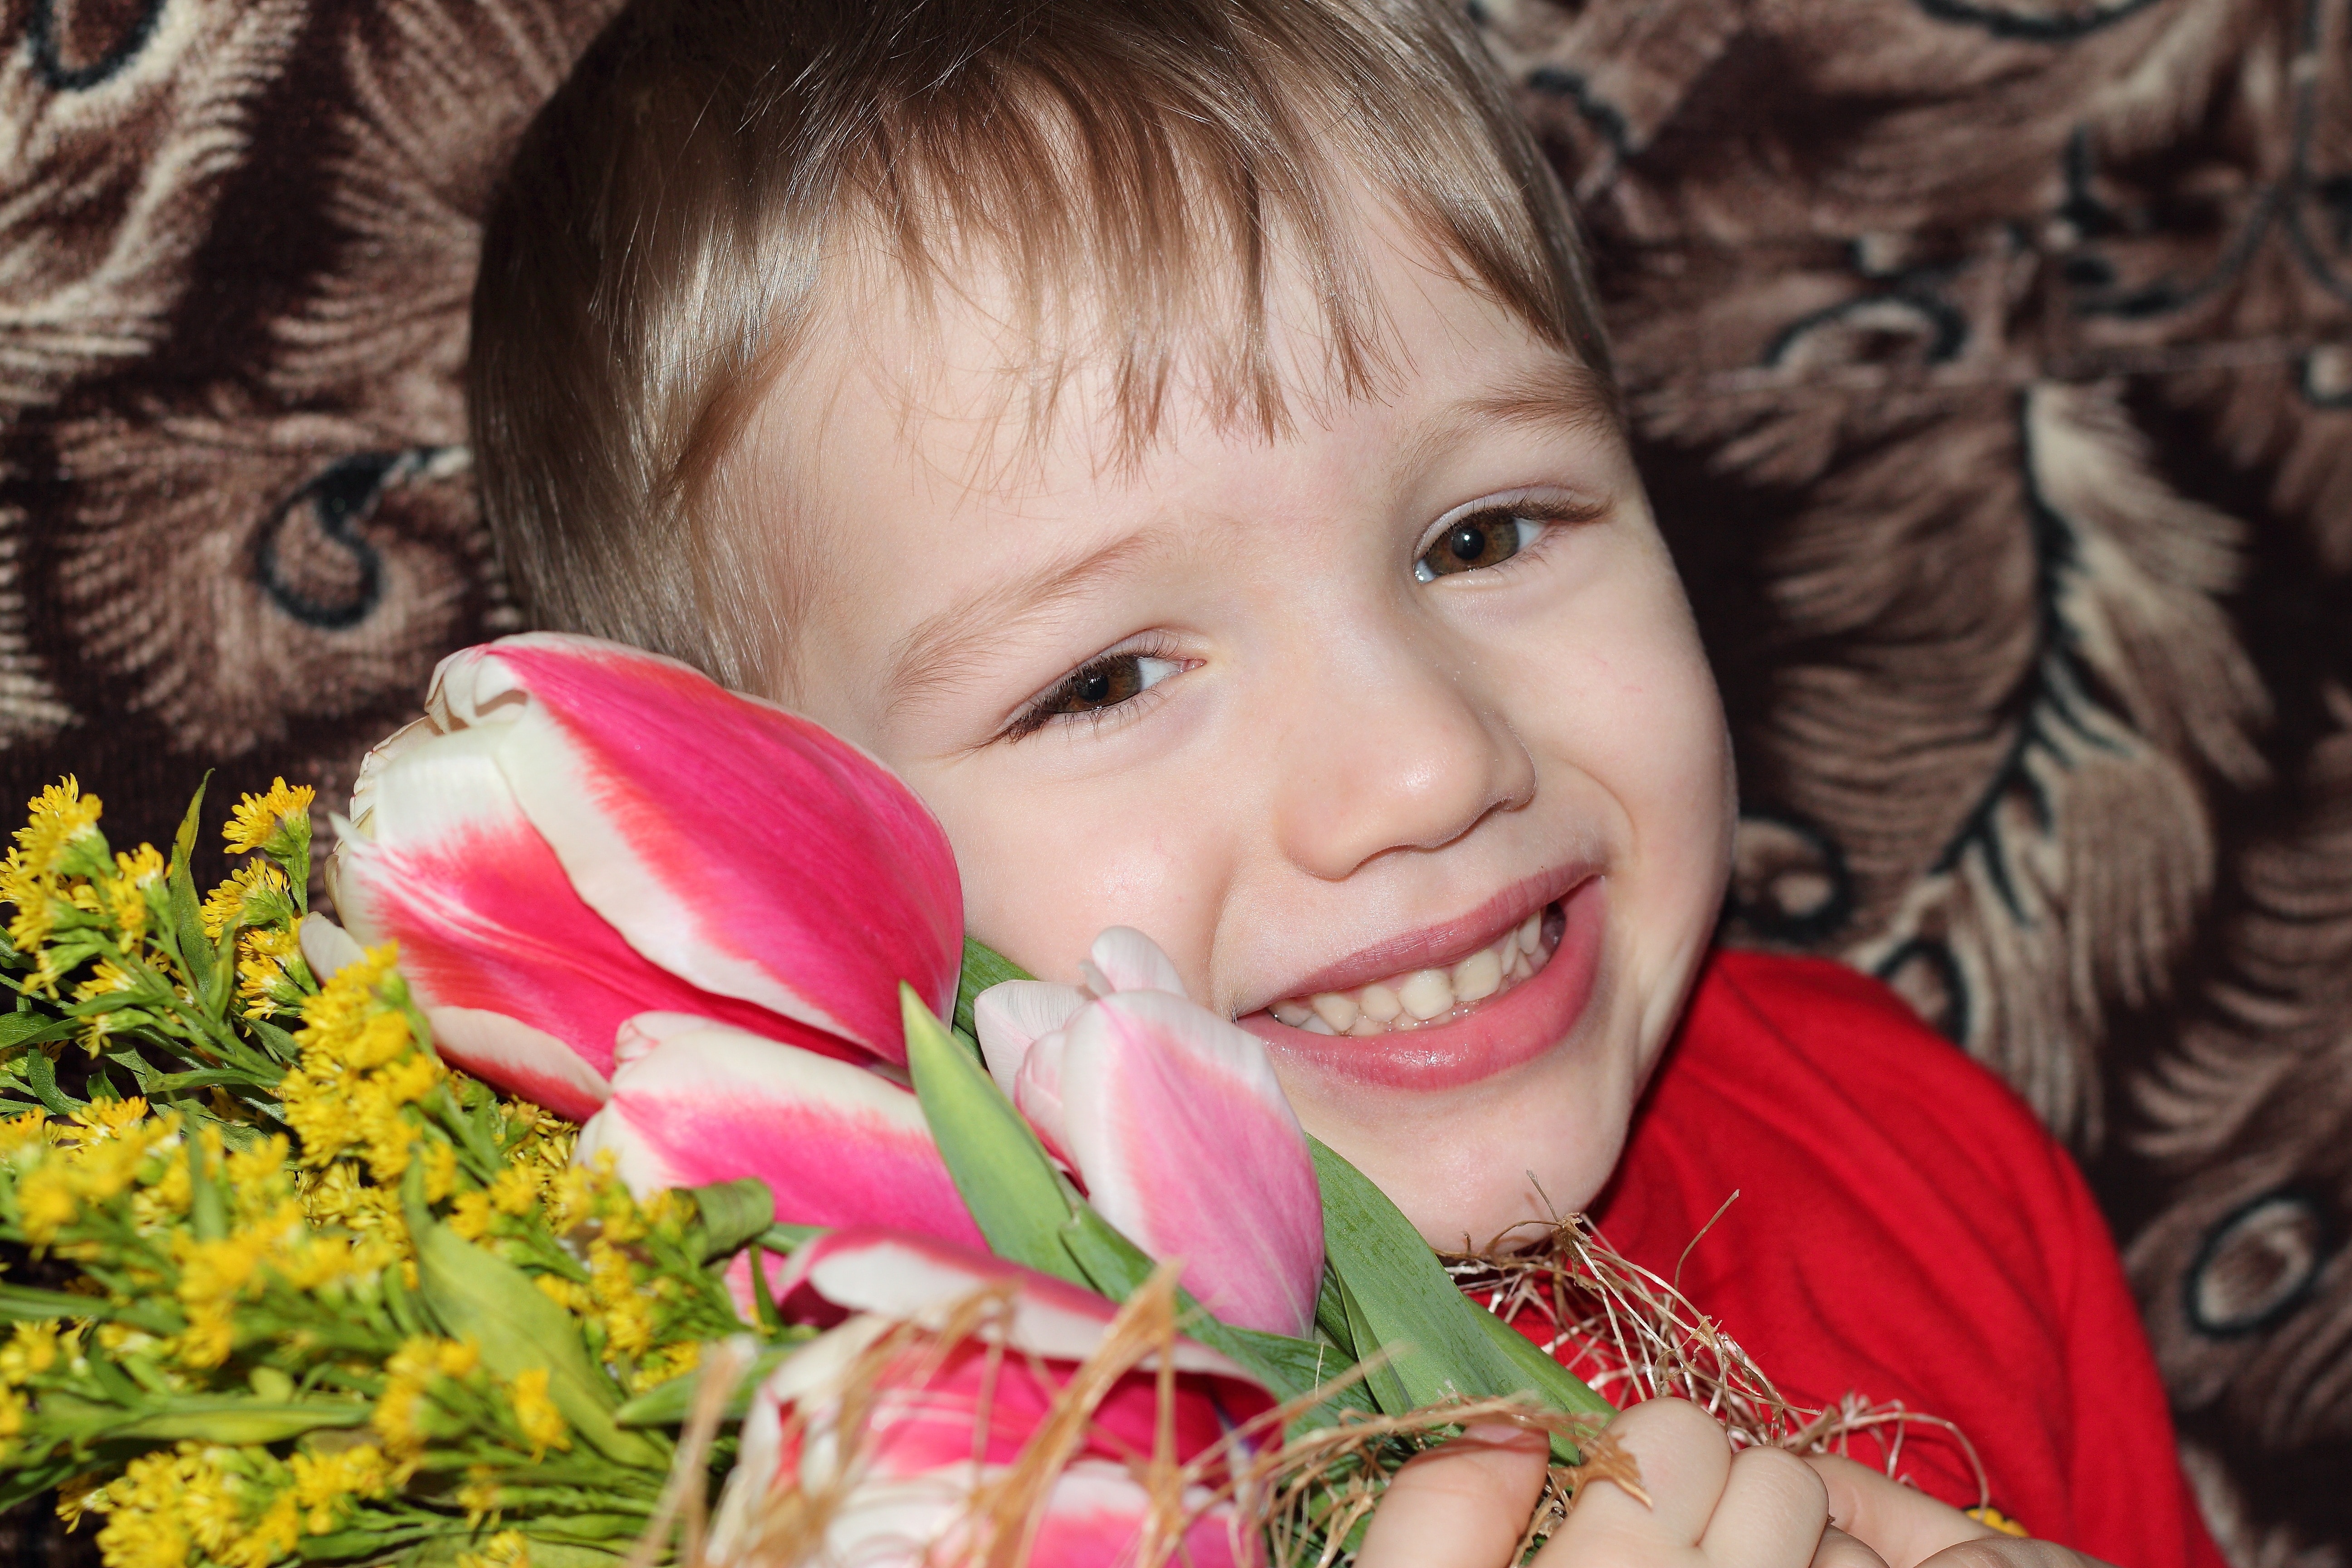 boy in red shirt holding red and pink tulips and yellow petaled flowers bouquet